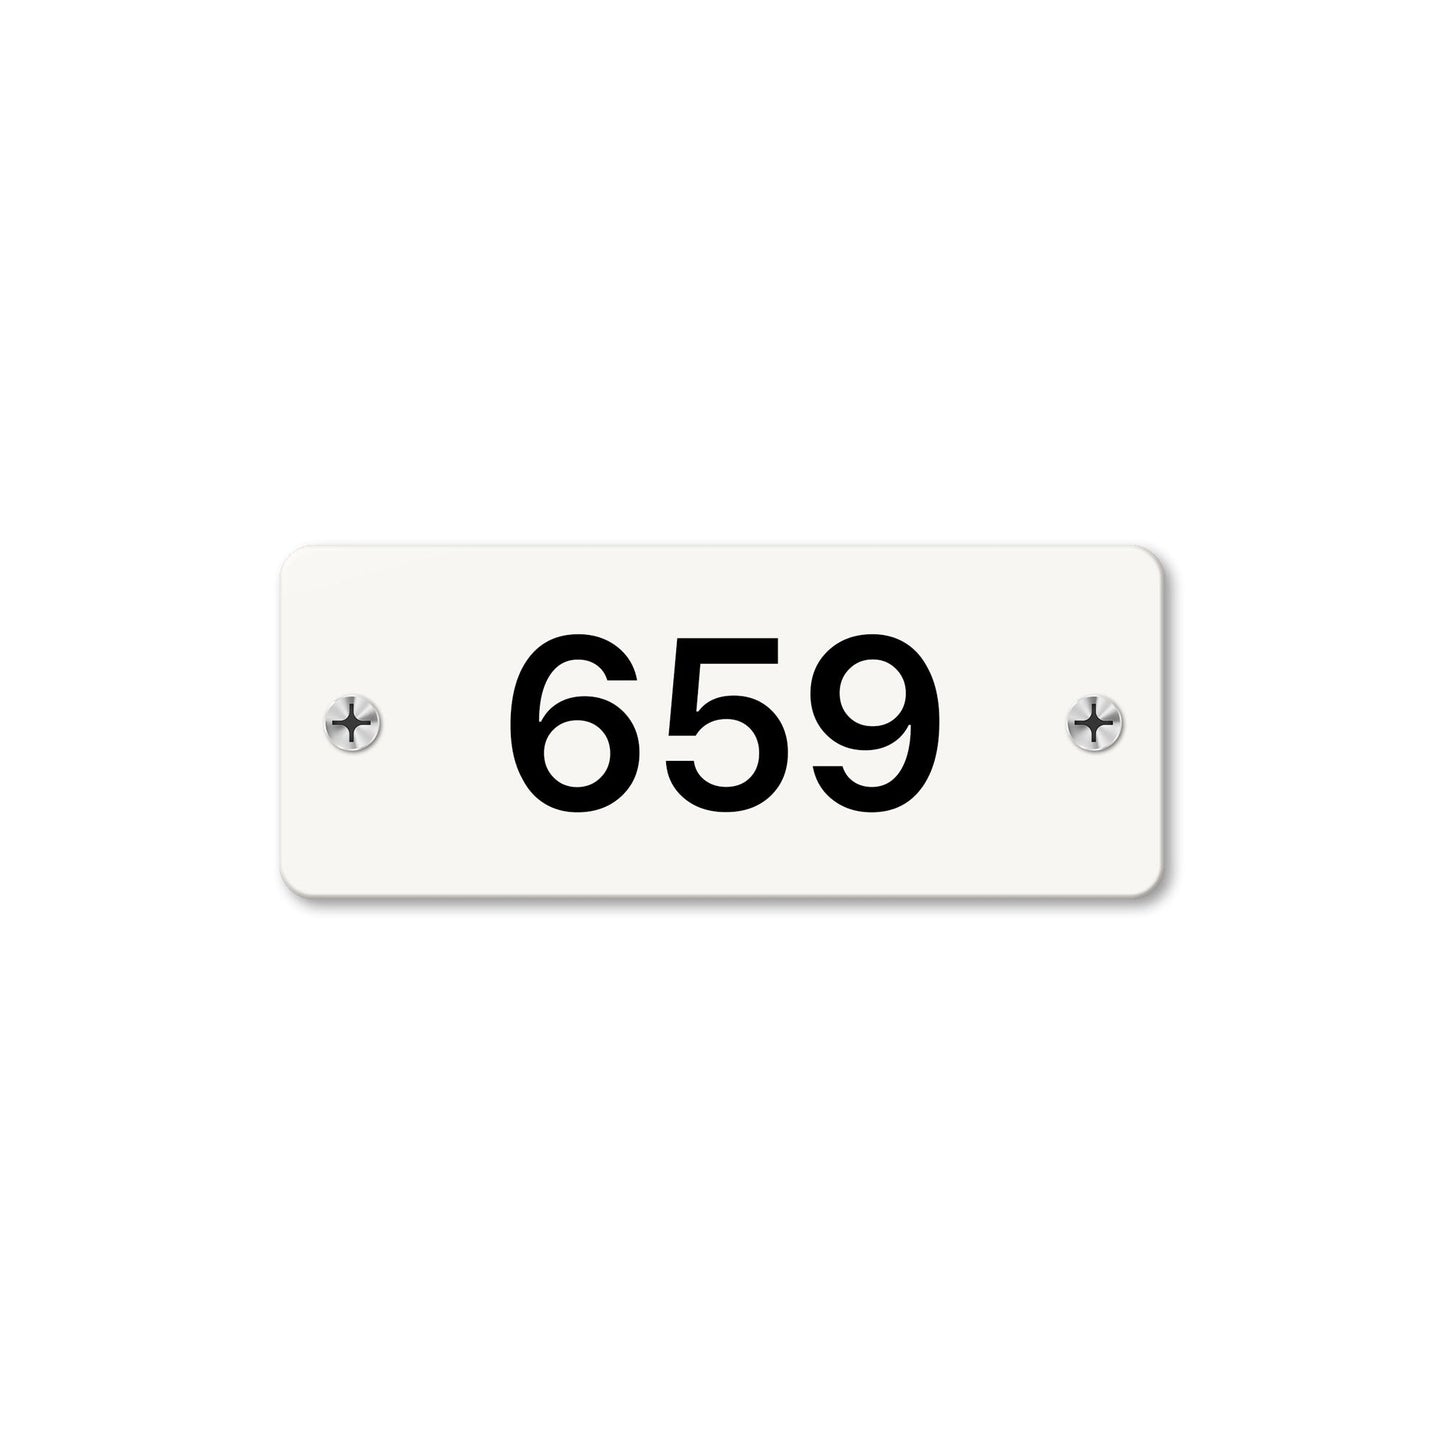 Numeral 659